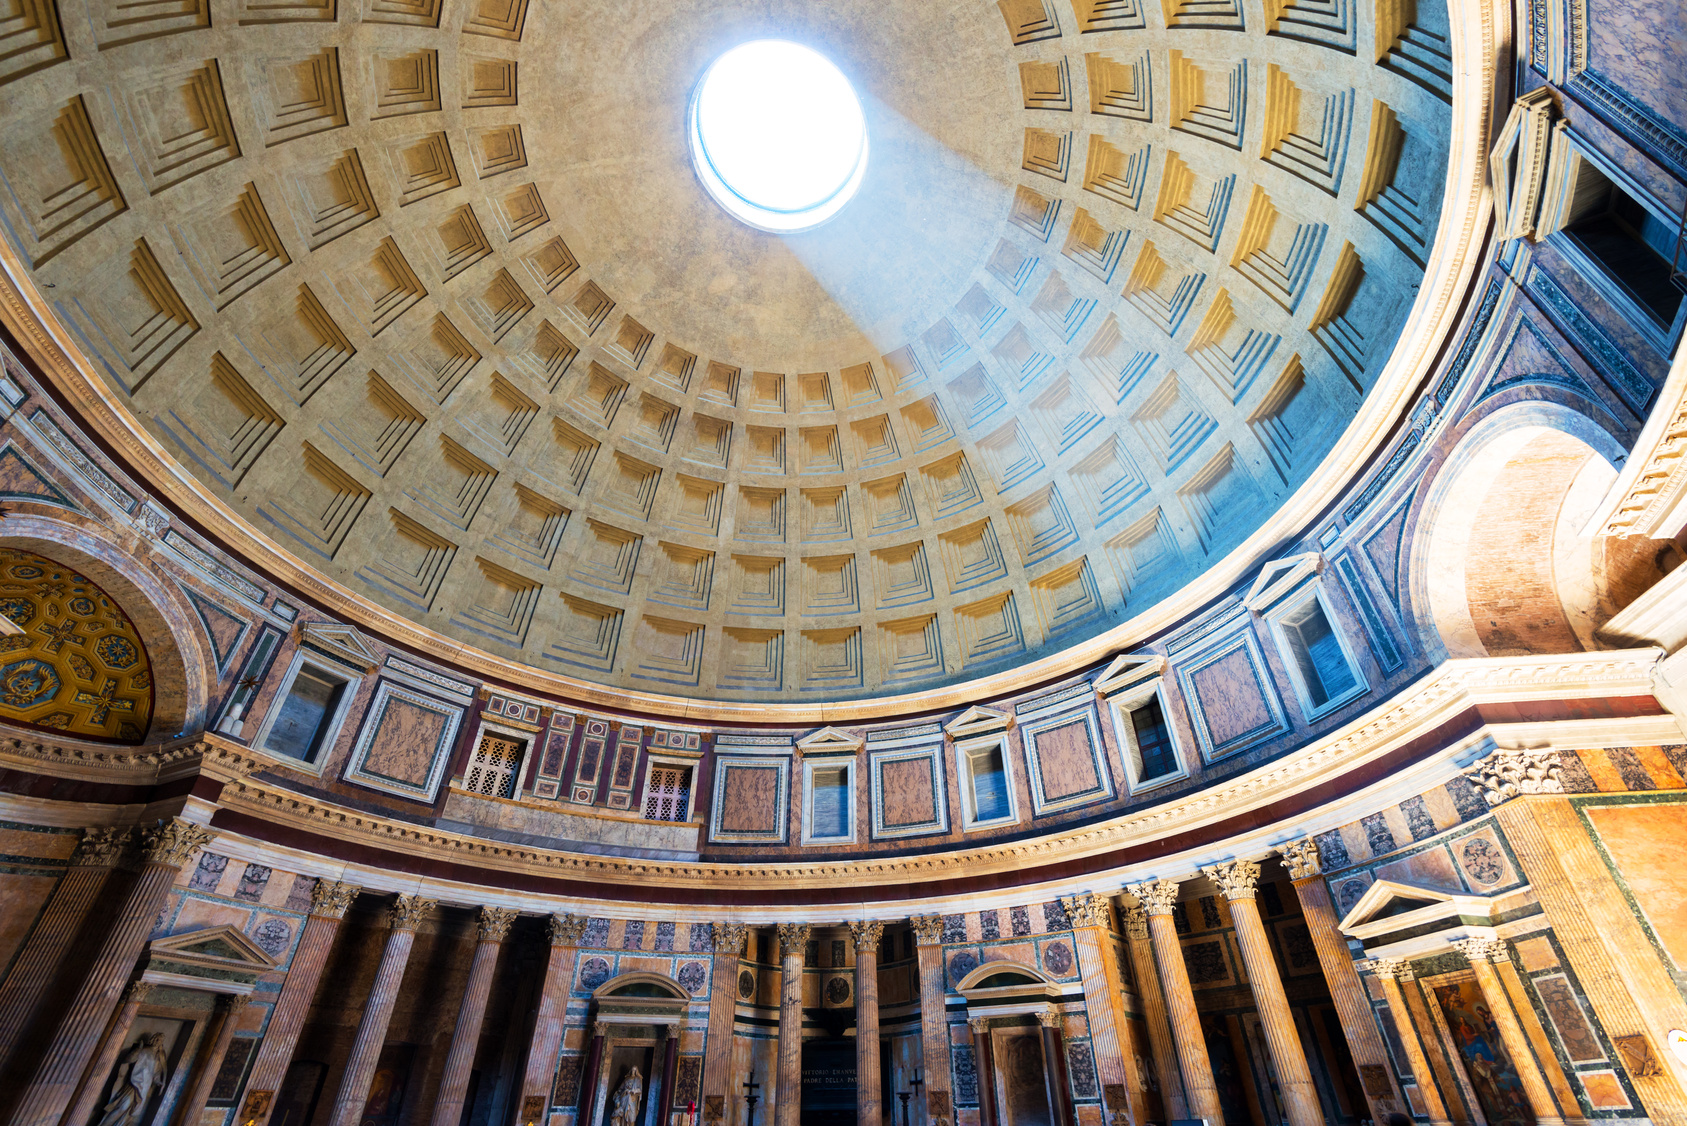 Inside the Pantheon (Rome)